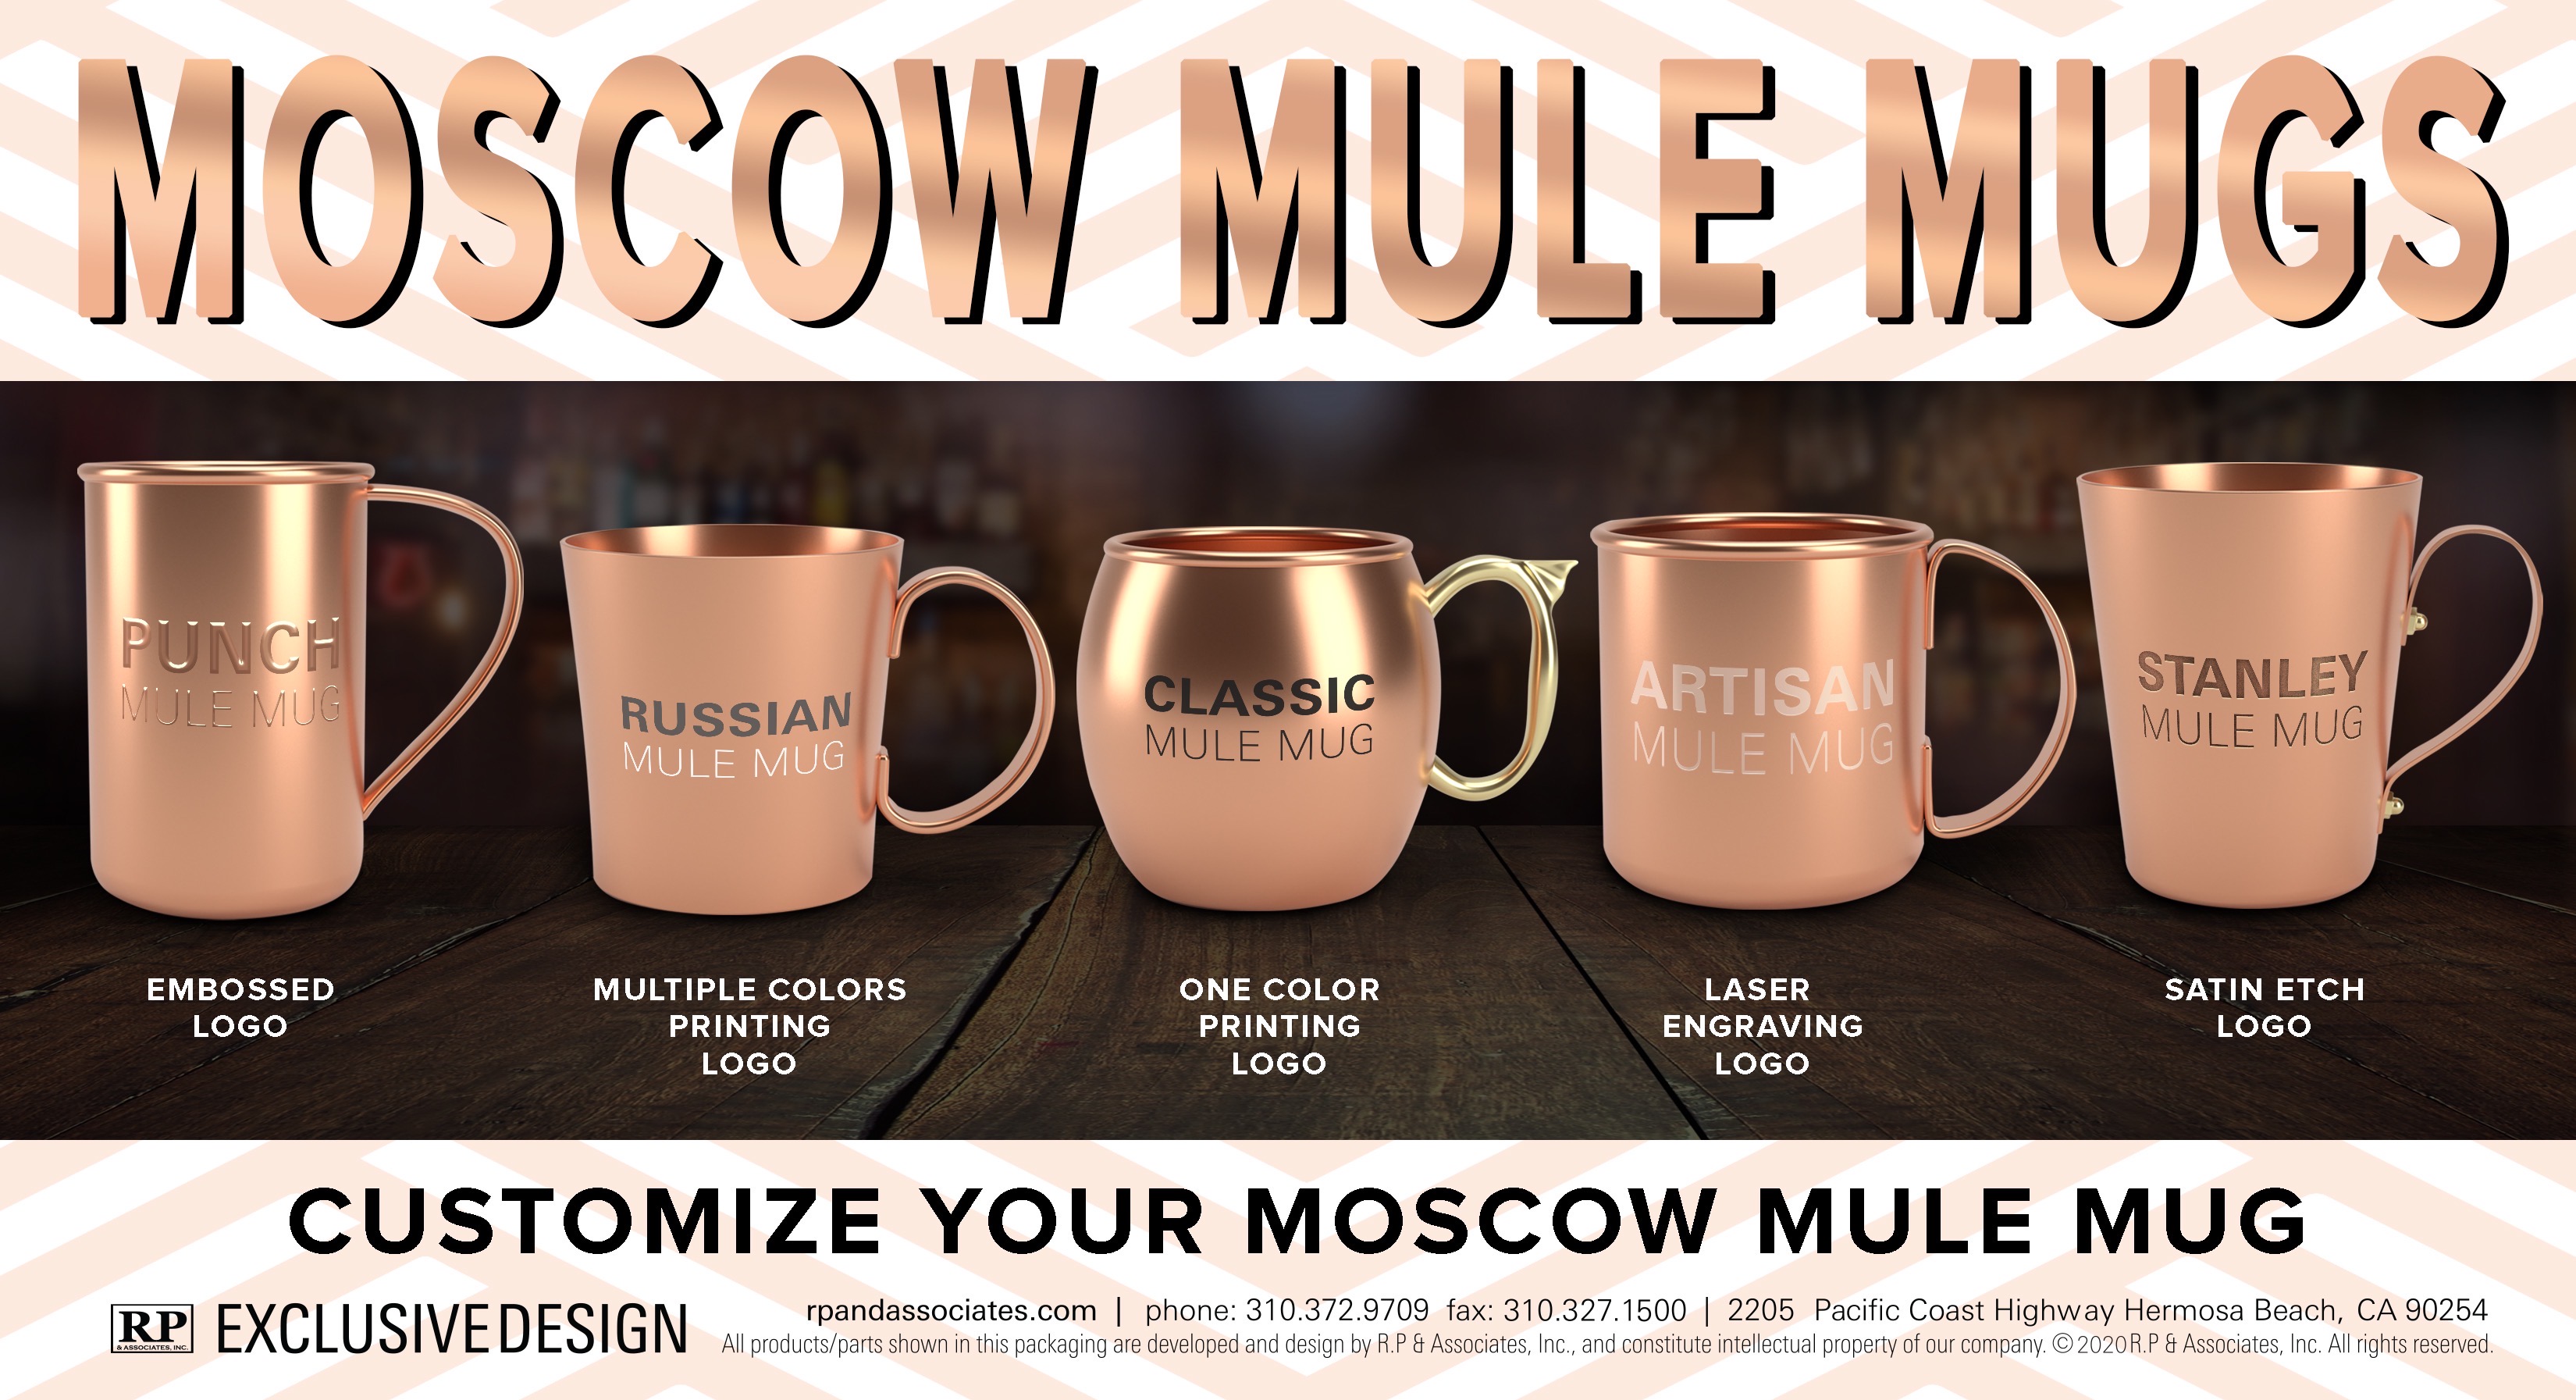 Upkey Moscow Mule Copper Mugs Set of 4 Moscow Mule Cups Copper Cocktail Drinking Mug Kitchen Cup 16 oz Copper Cups with 4 Cocktail Copper Straws for Dining Entertaining Bar Moscow Mule Gift Set